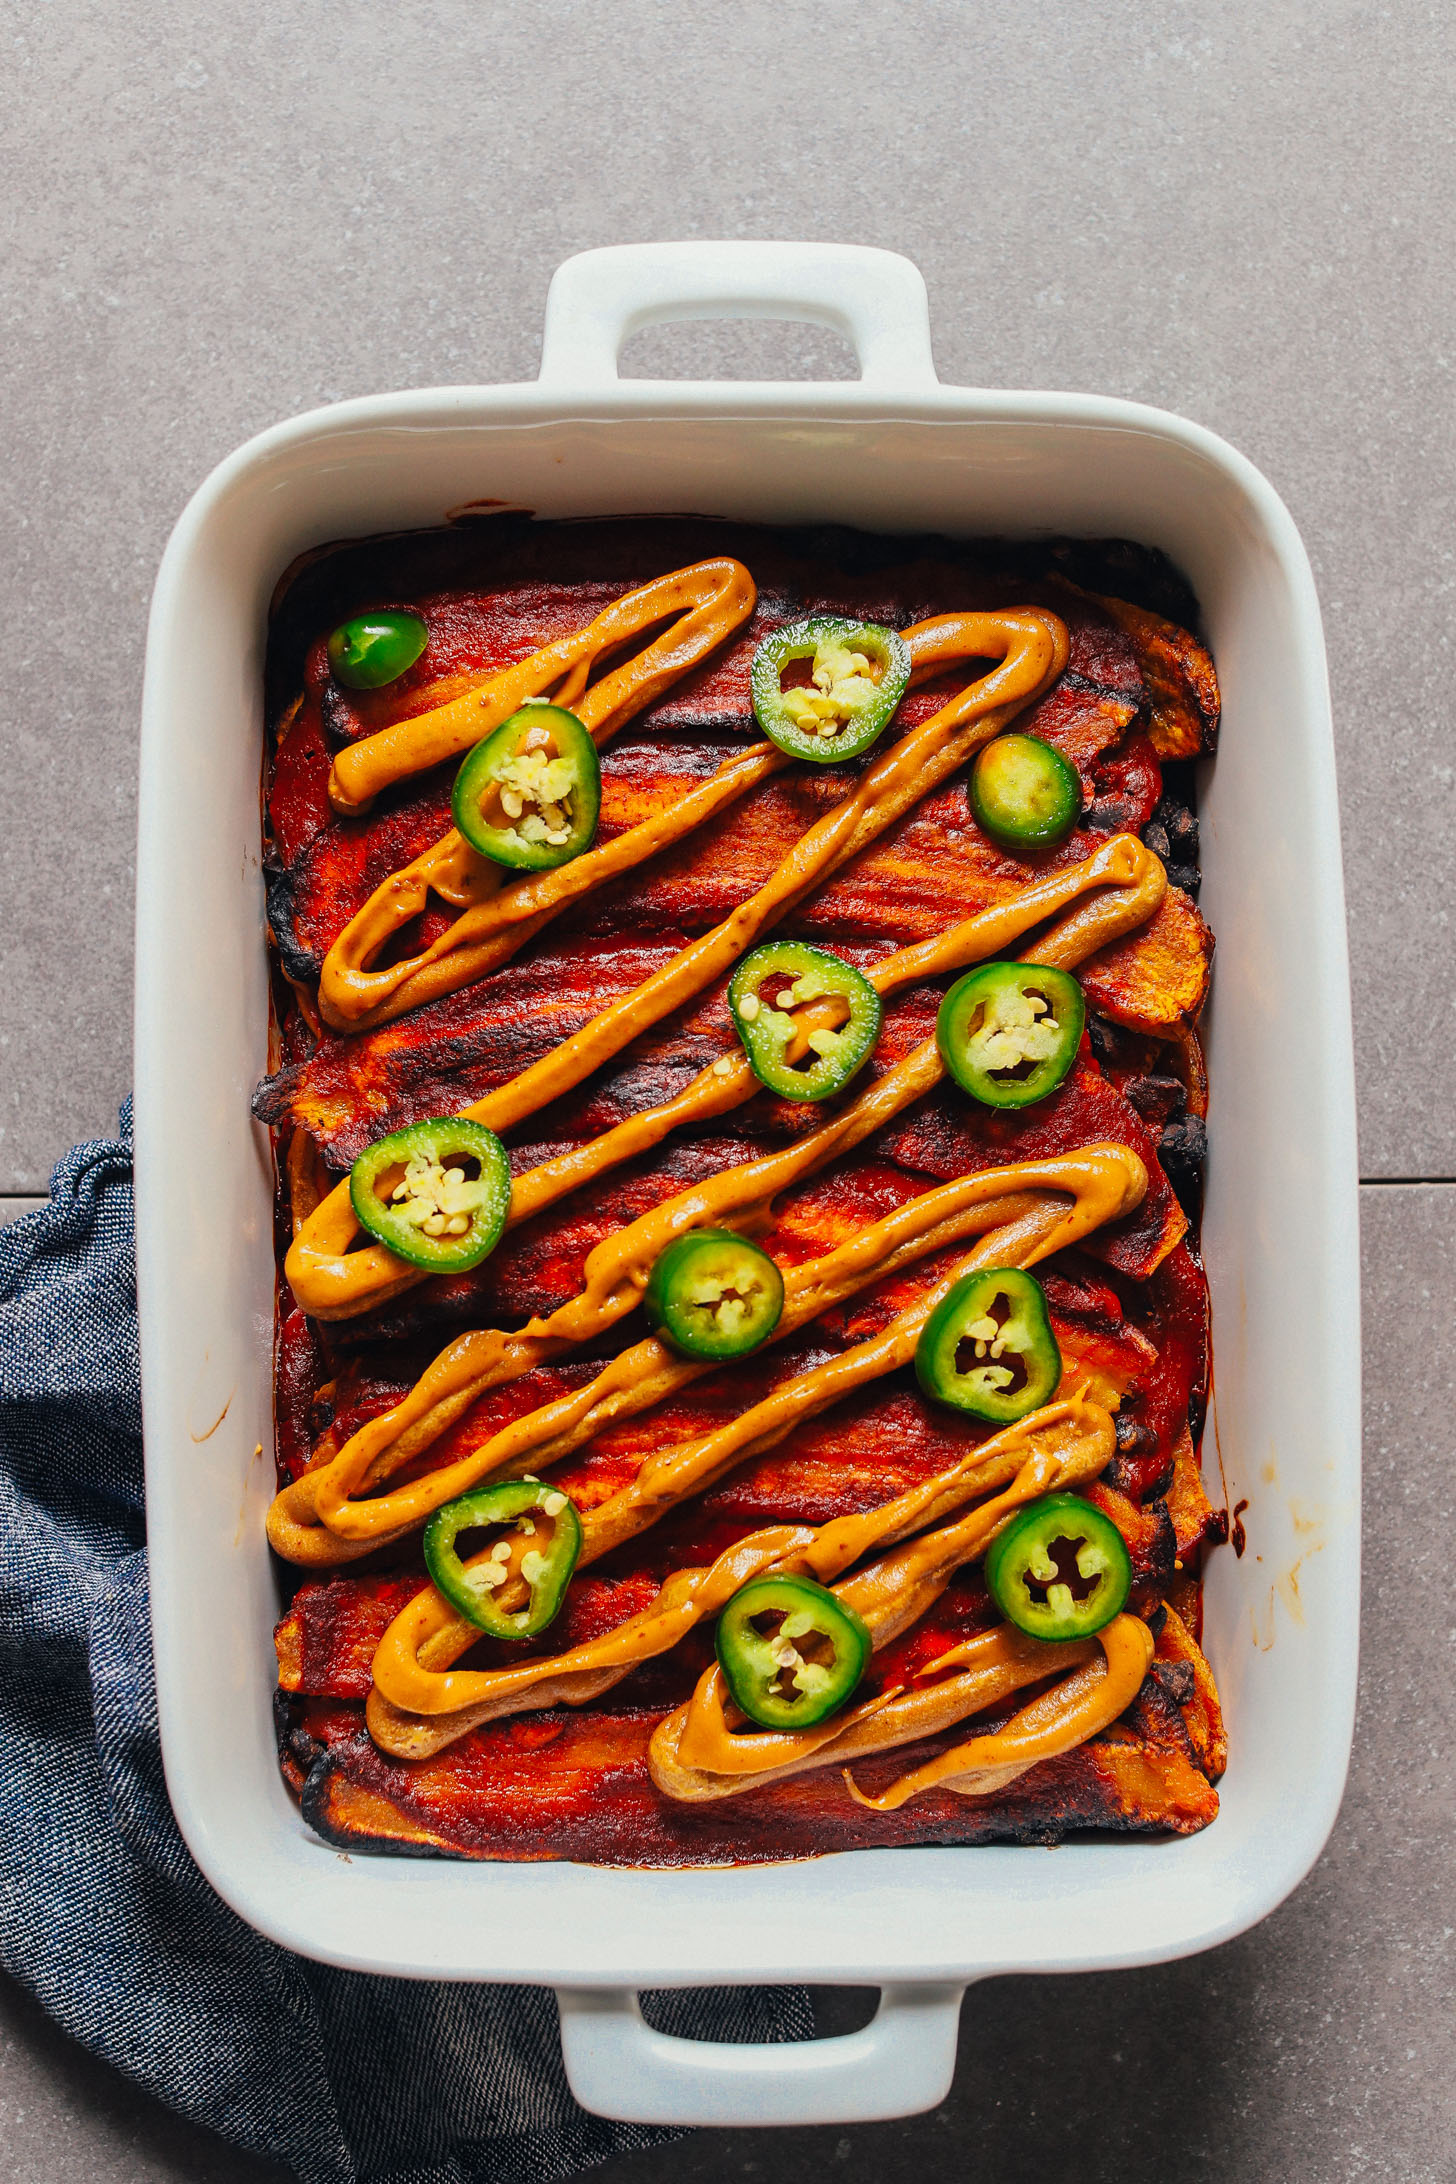 Baking dish filled with our recipe for Plantain Black Bean Enchilada Bake with Vegan Queso